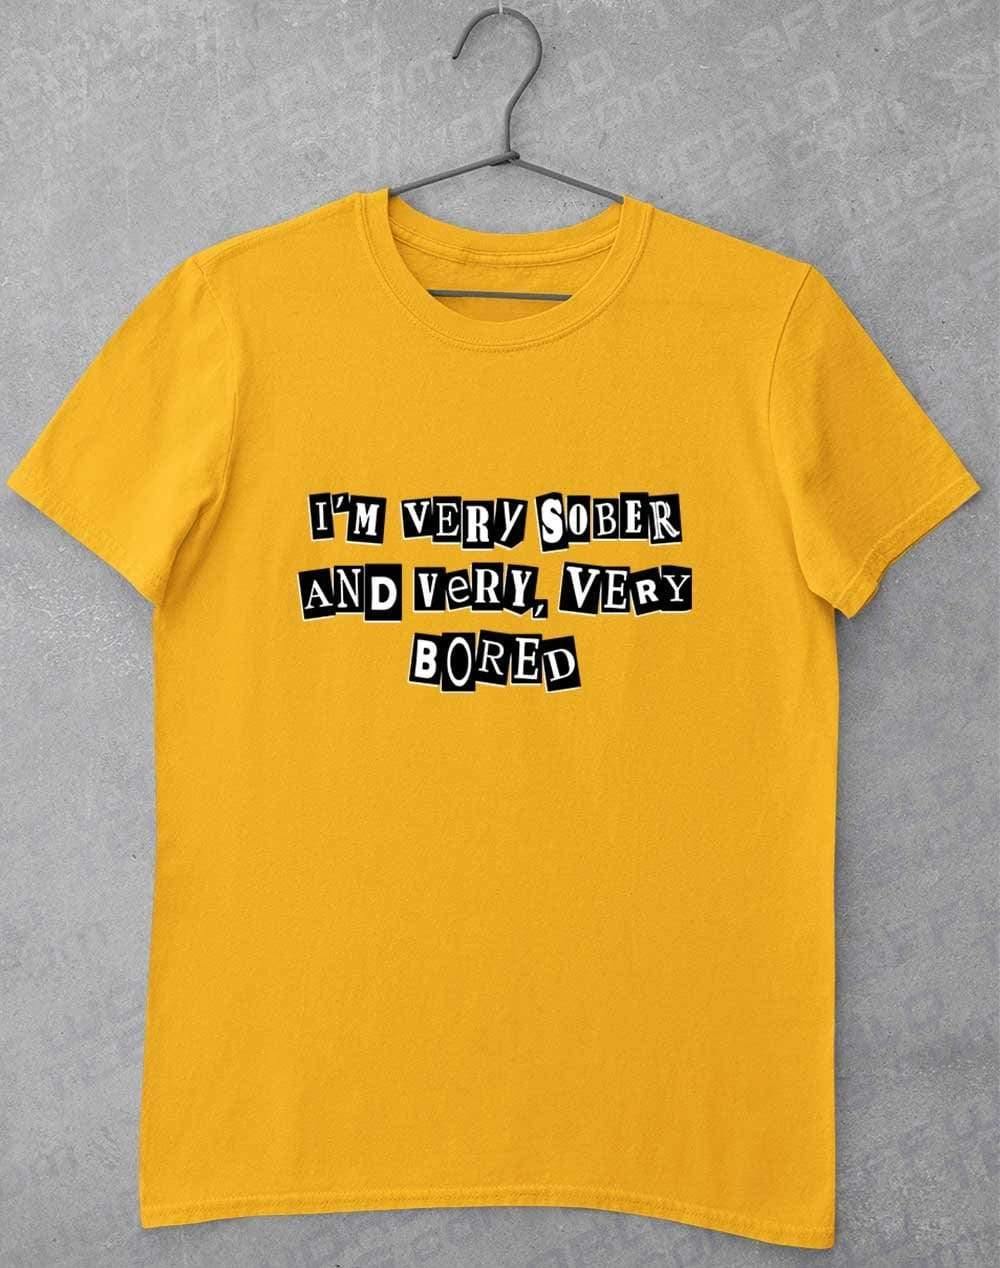 I'm Very Sober and Very Very Bored T-Shirt S / Gold  - Off World Tees